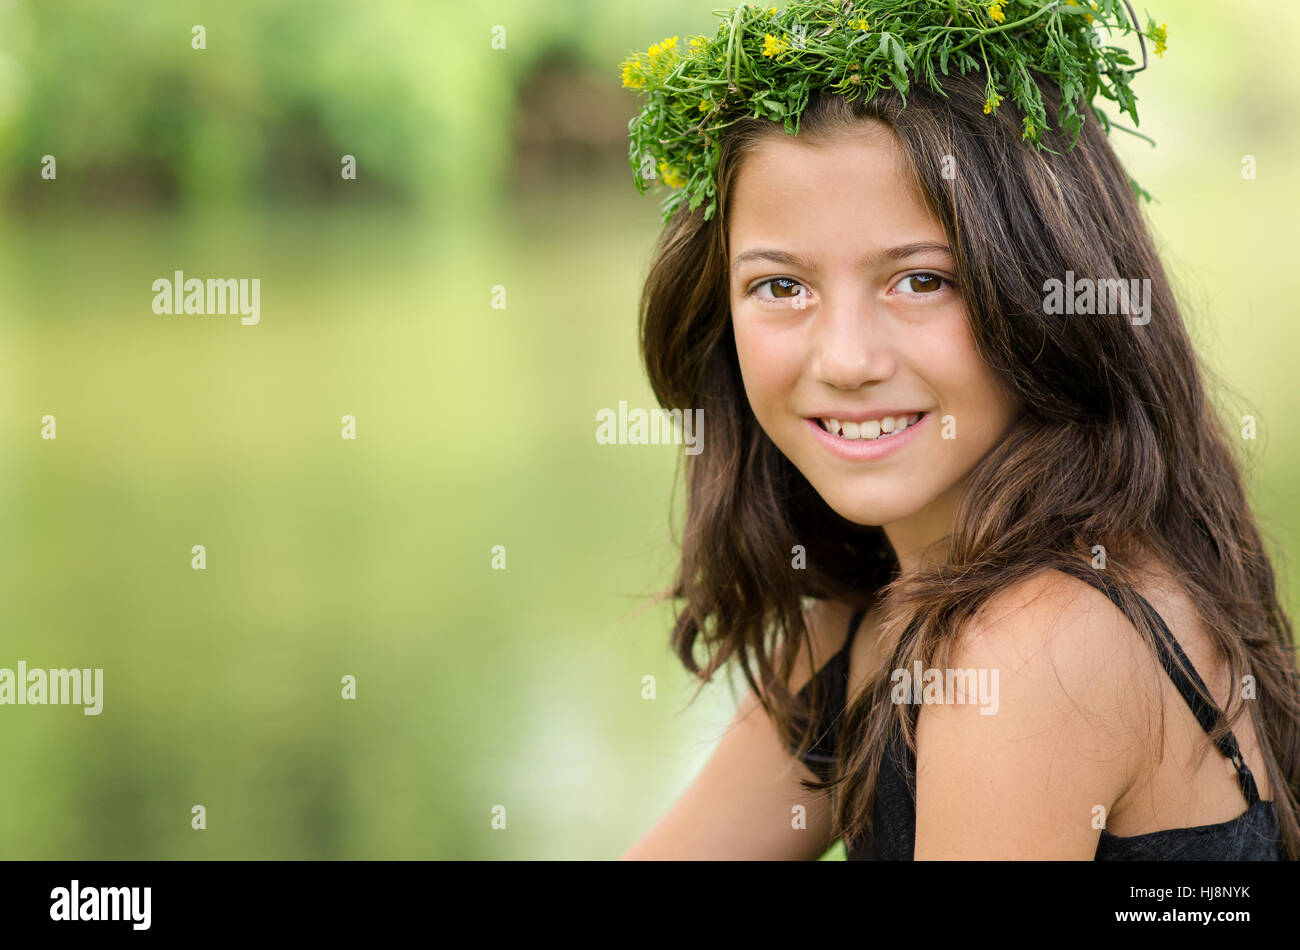 Portrait of a smiling girl wearing a floral wreath on her head Stock Photo